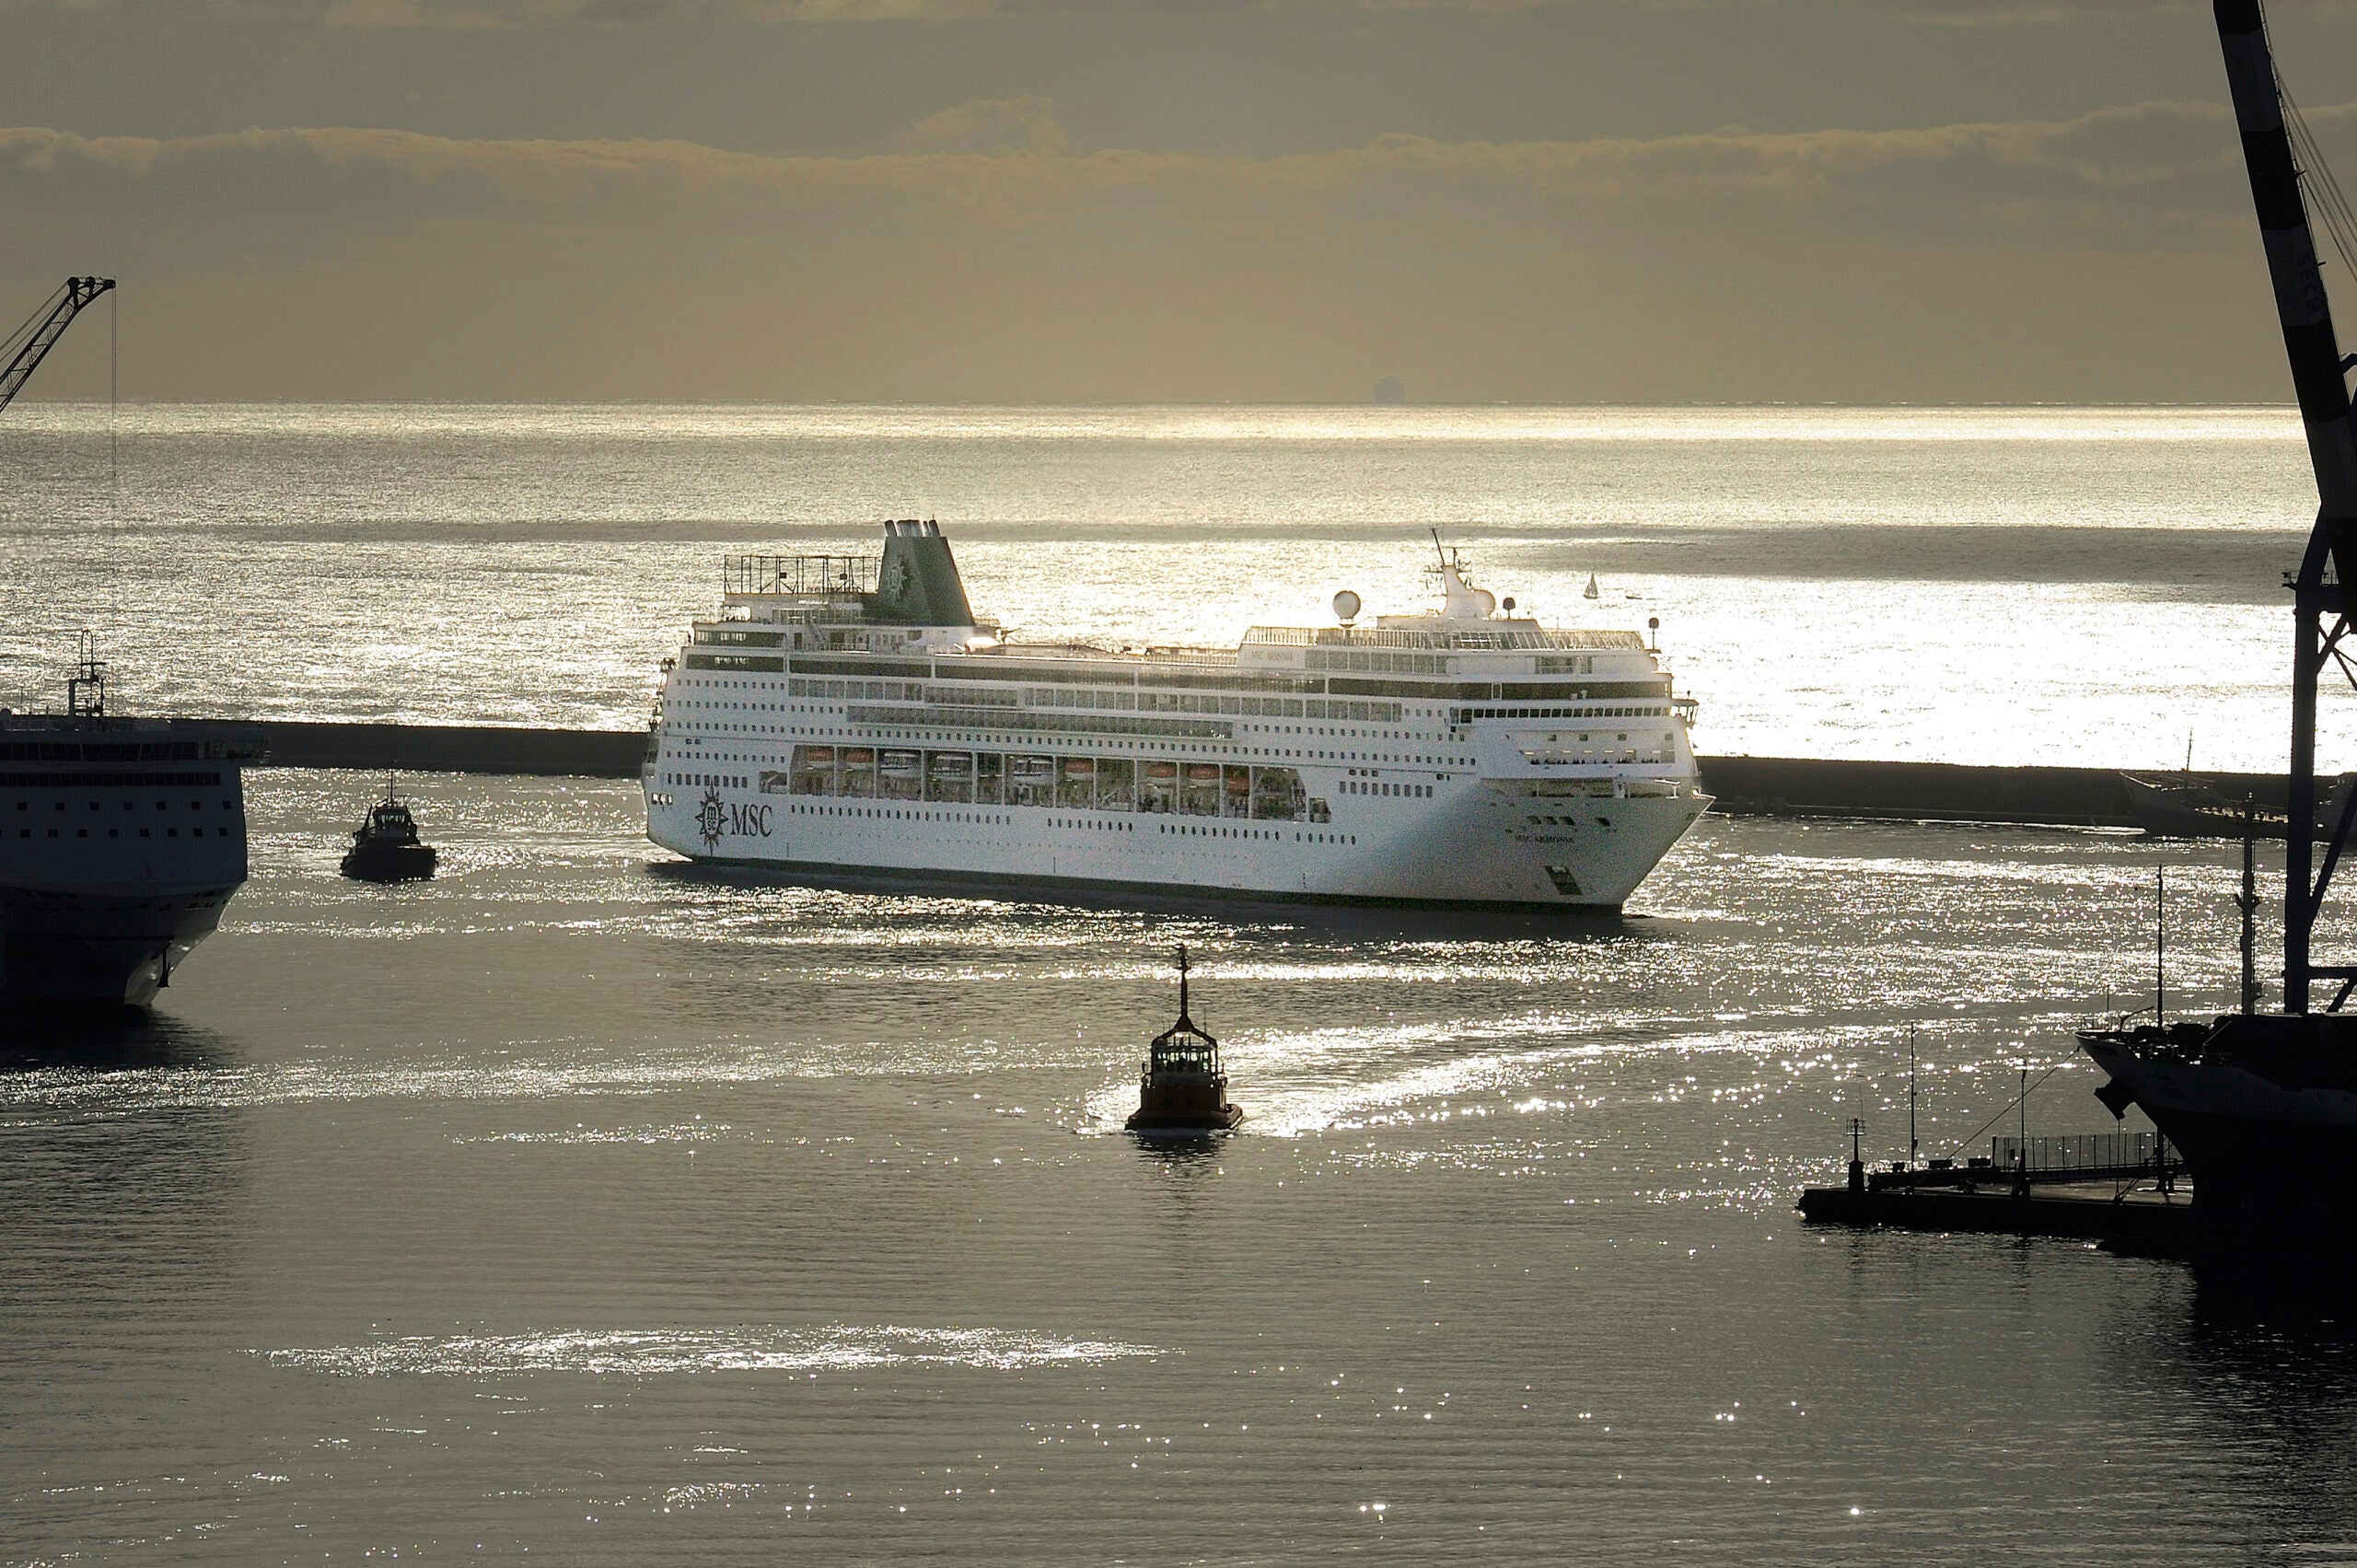 Among the smallest MSC Cruises ships is the MSC Armonia. 